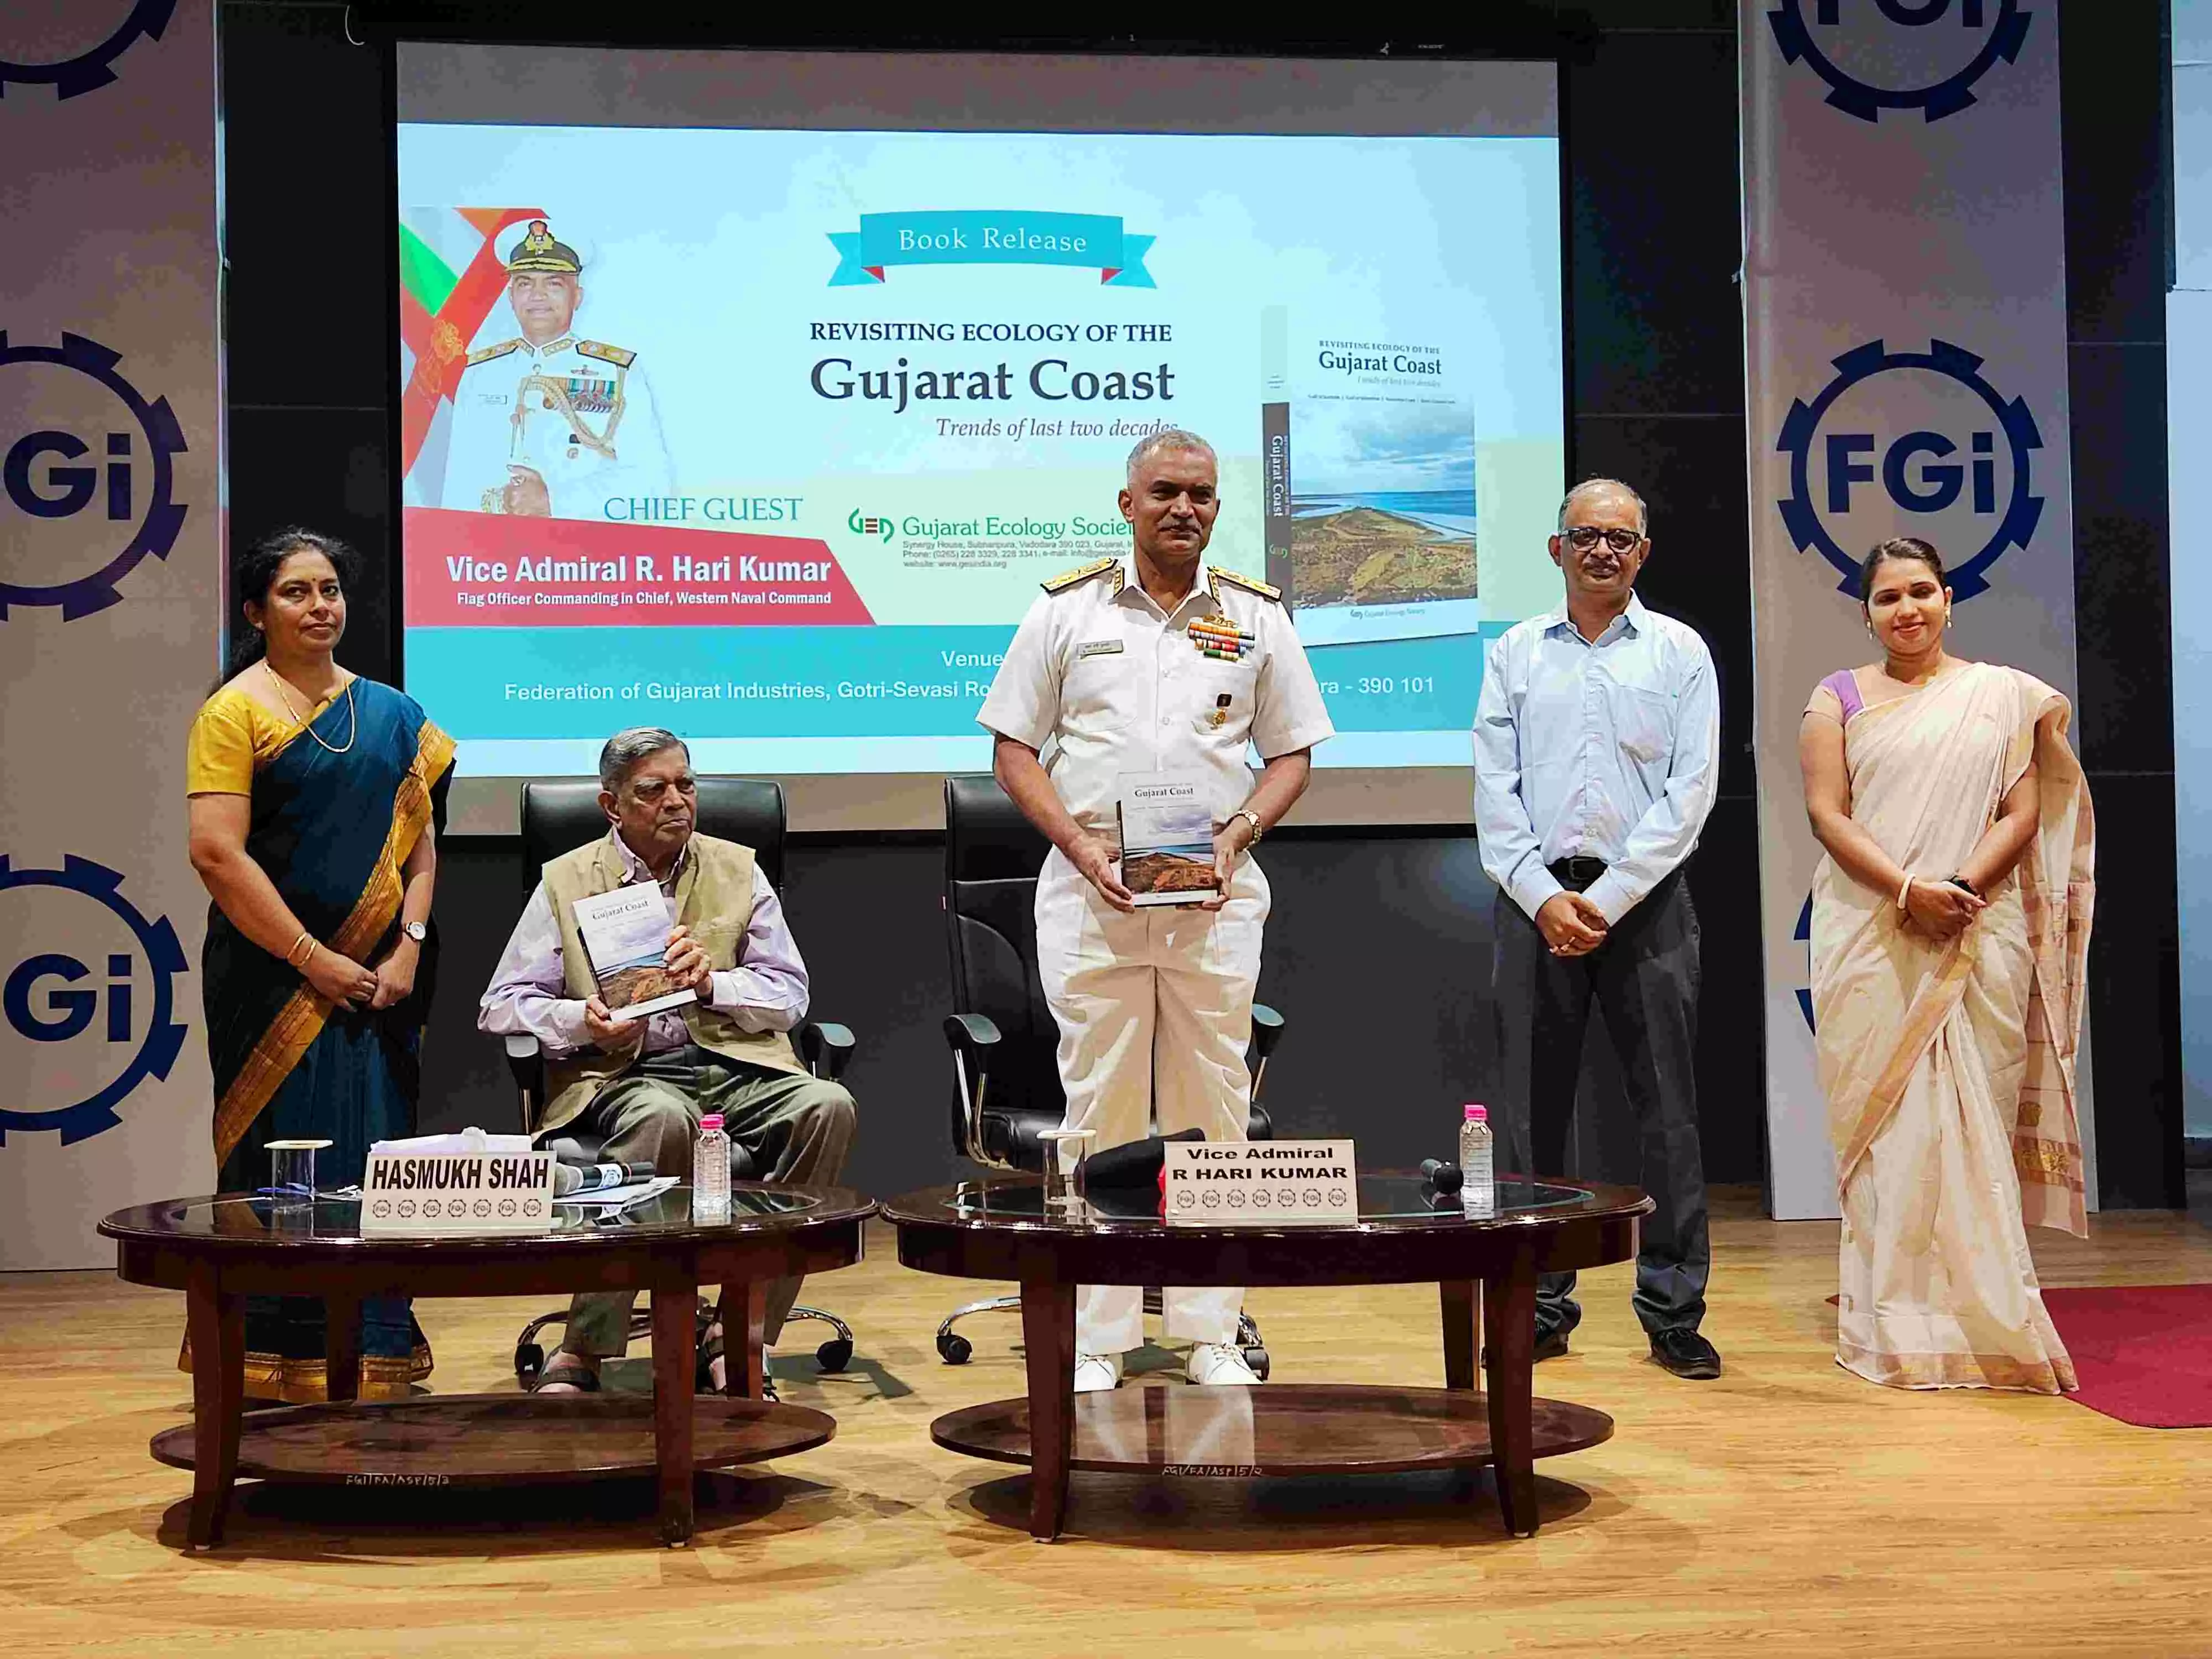 Revisiting Ecology of the Gujarat Coast by Gujarat Ecology Society